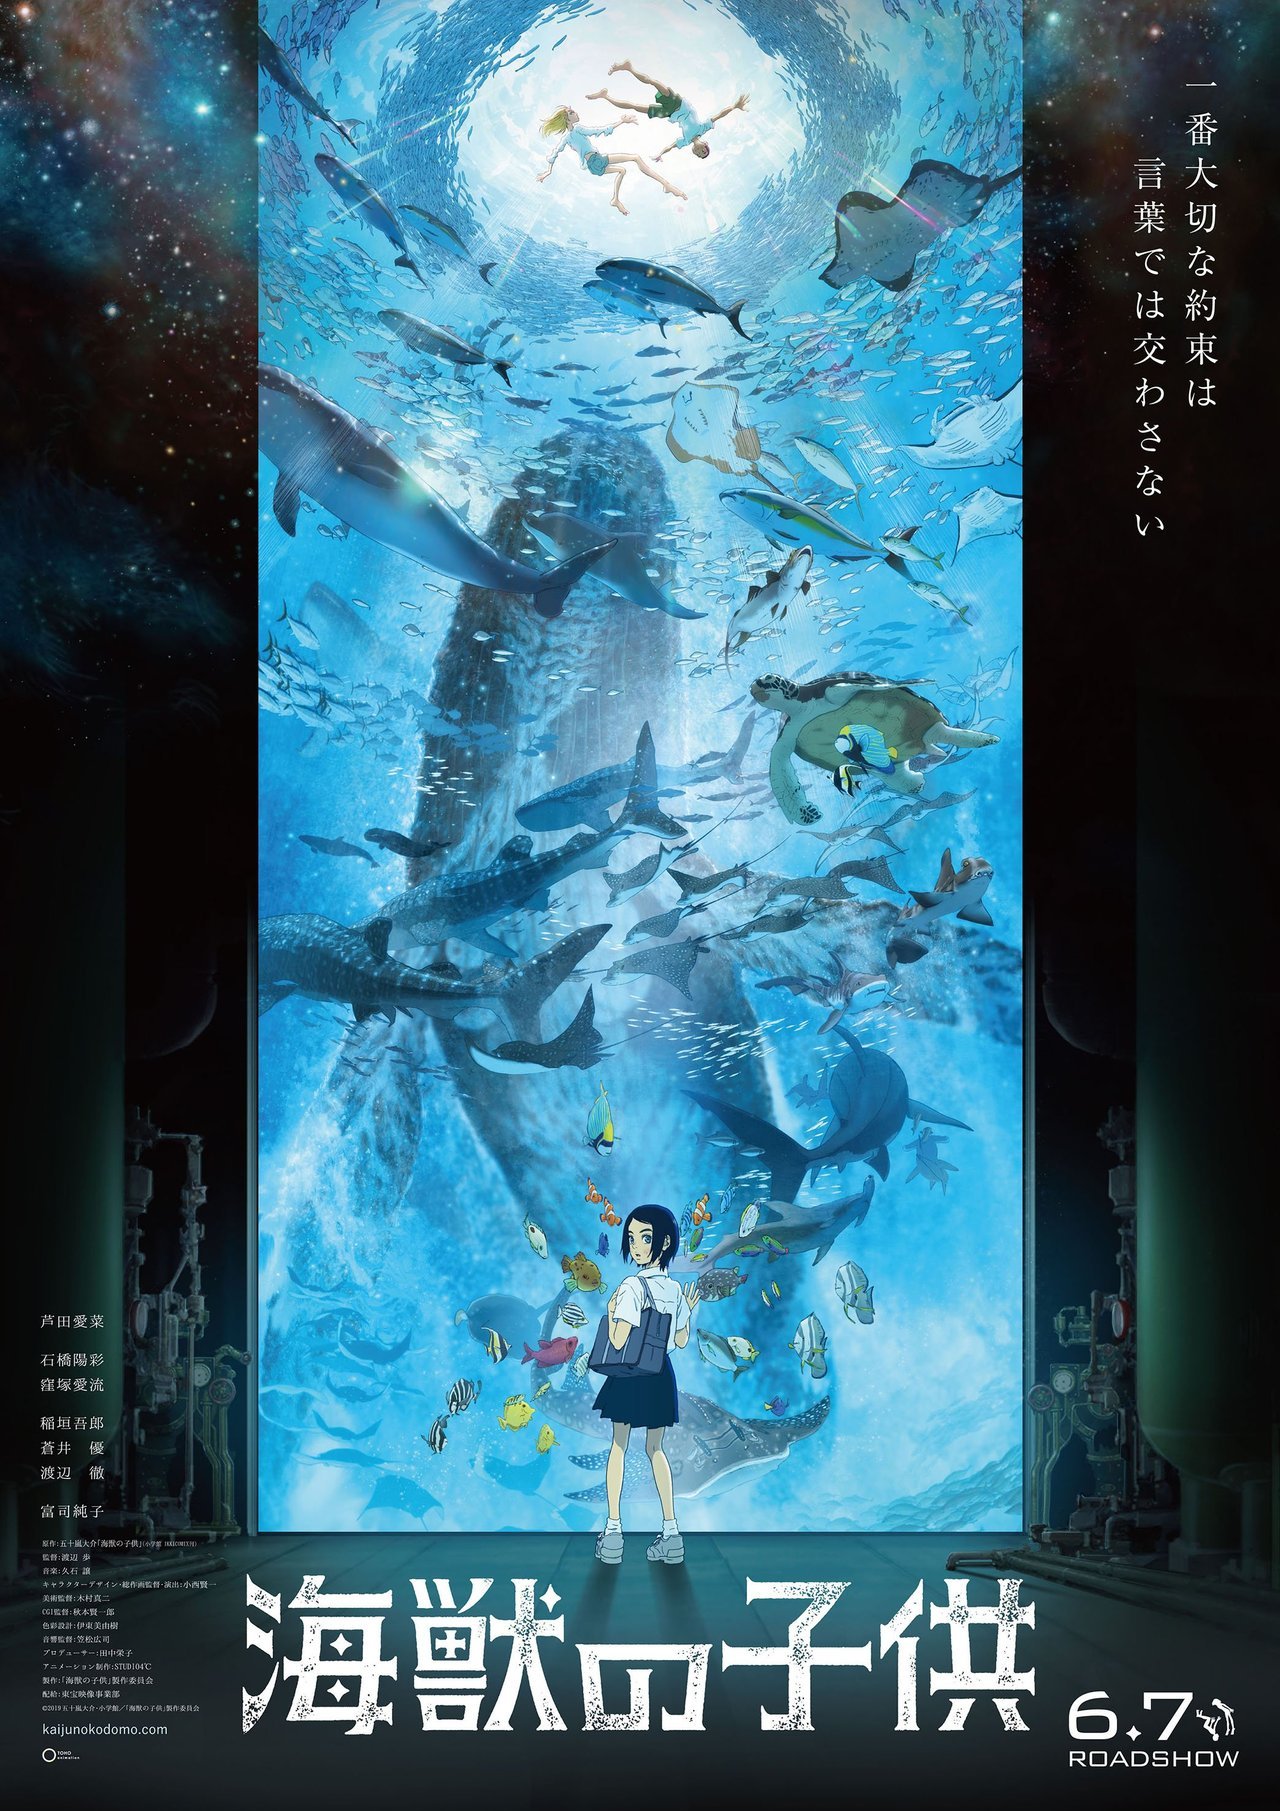 New poster visual and additional cast for the anime film âKaijuu no Kodomoâ (Children of the Sea); opens June 7th. -Synopsis-ââOne summer vacation, Ruka meets two boys, âUmiâ and âSora,â whose upbringing contains strange and wonderful secrets. Drawn...